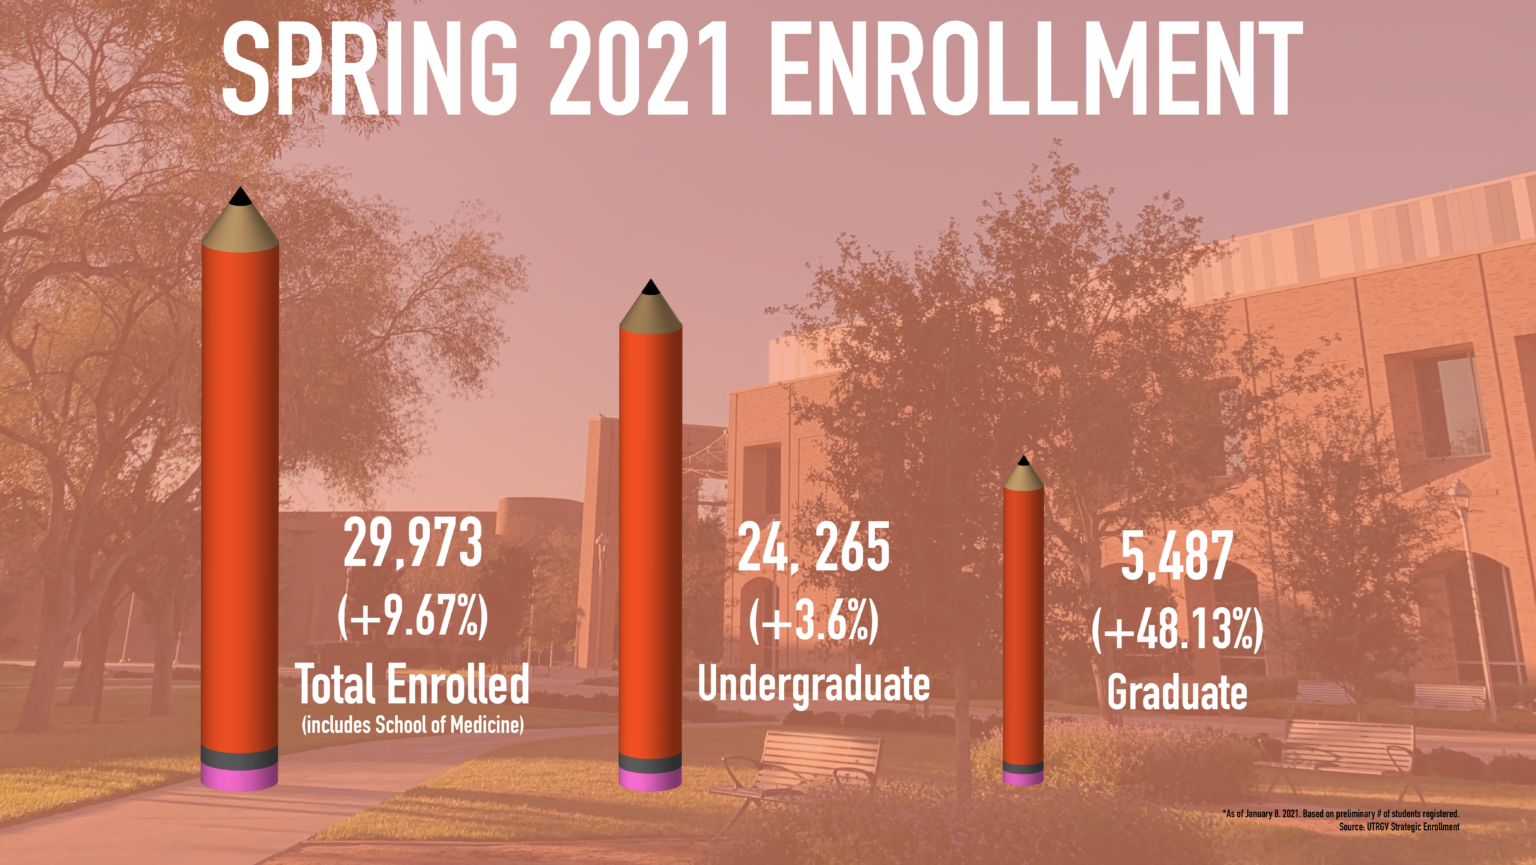 UTRGV continues to see enrollment growth in the spring semester The